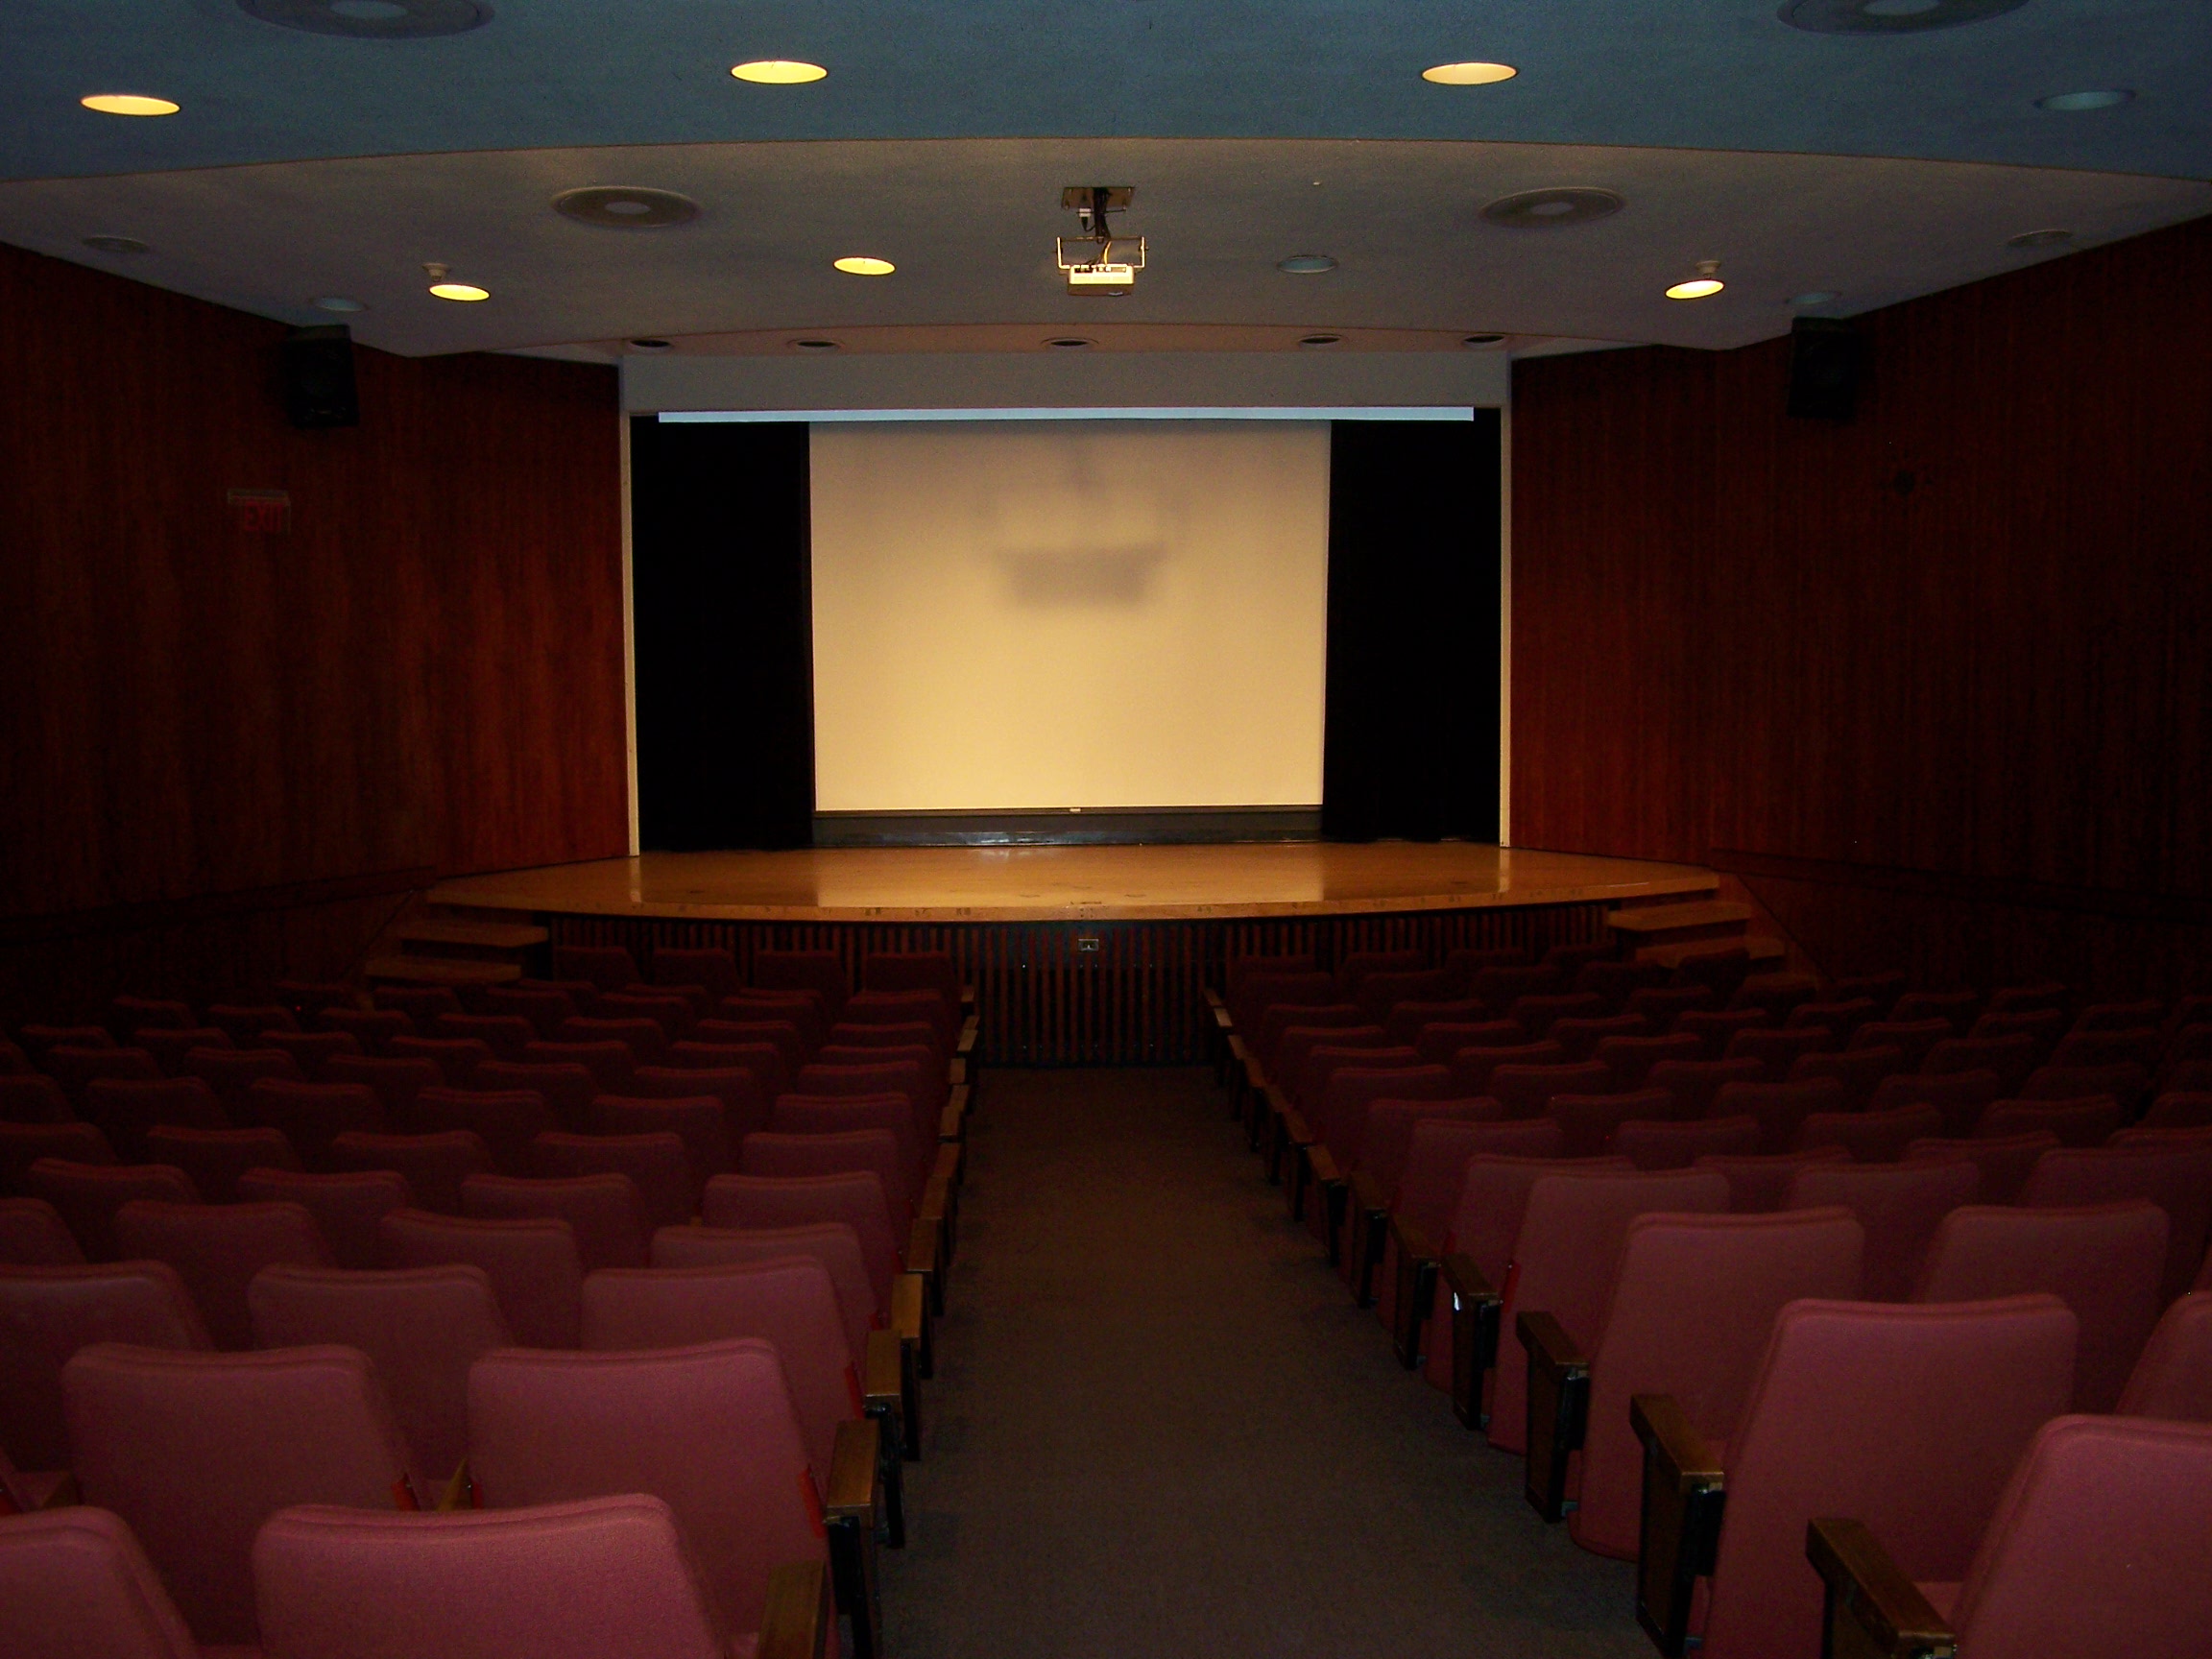 View down the central aisle of a theatre style auditorium. Either side are rows of red, plush chairs. At the front is a raised wooden stage, and a projector screen hung against a black background.